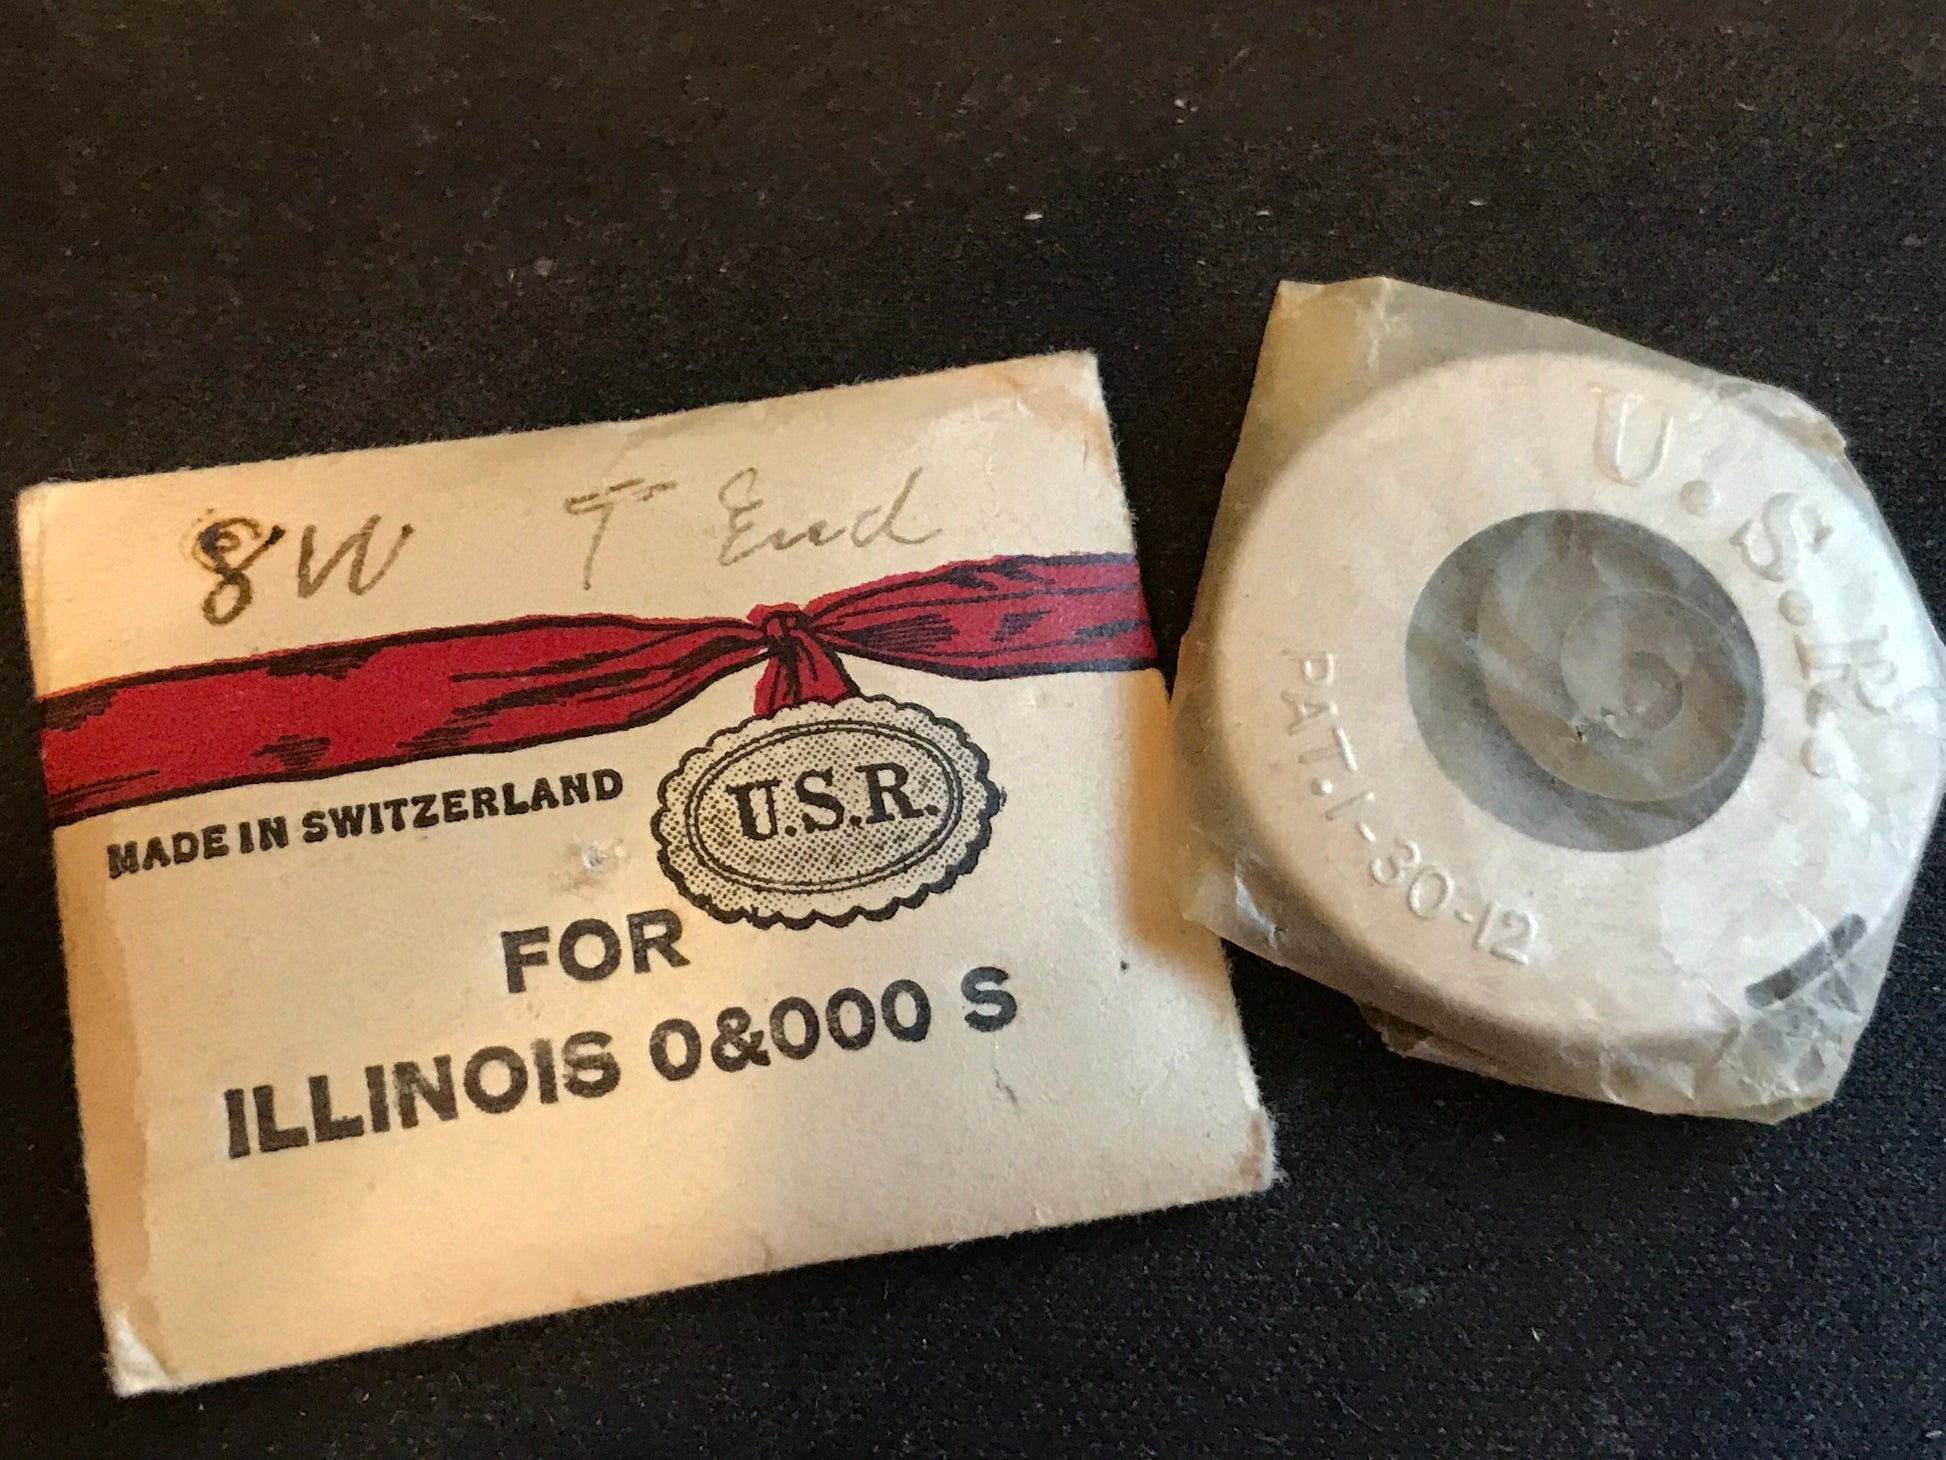 USR Mainspring for Illinois 0s & 3/0s No. 47358 - Steel